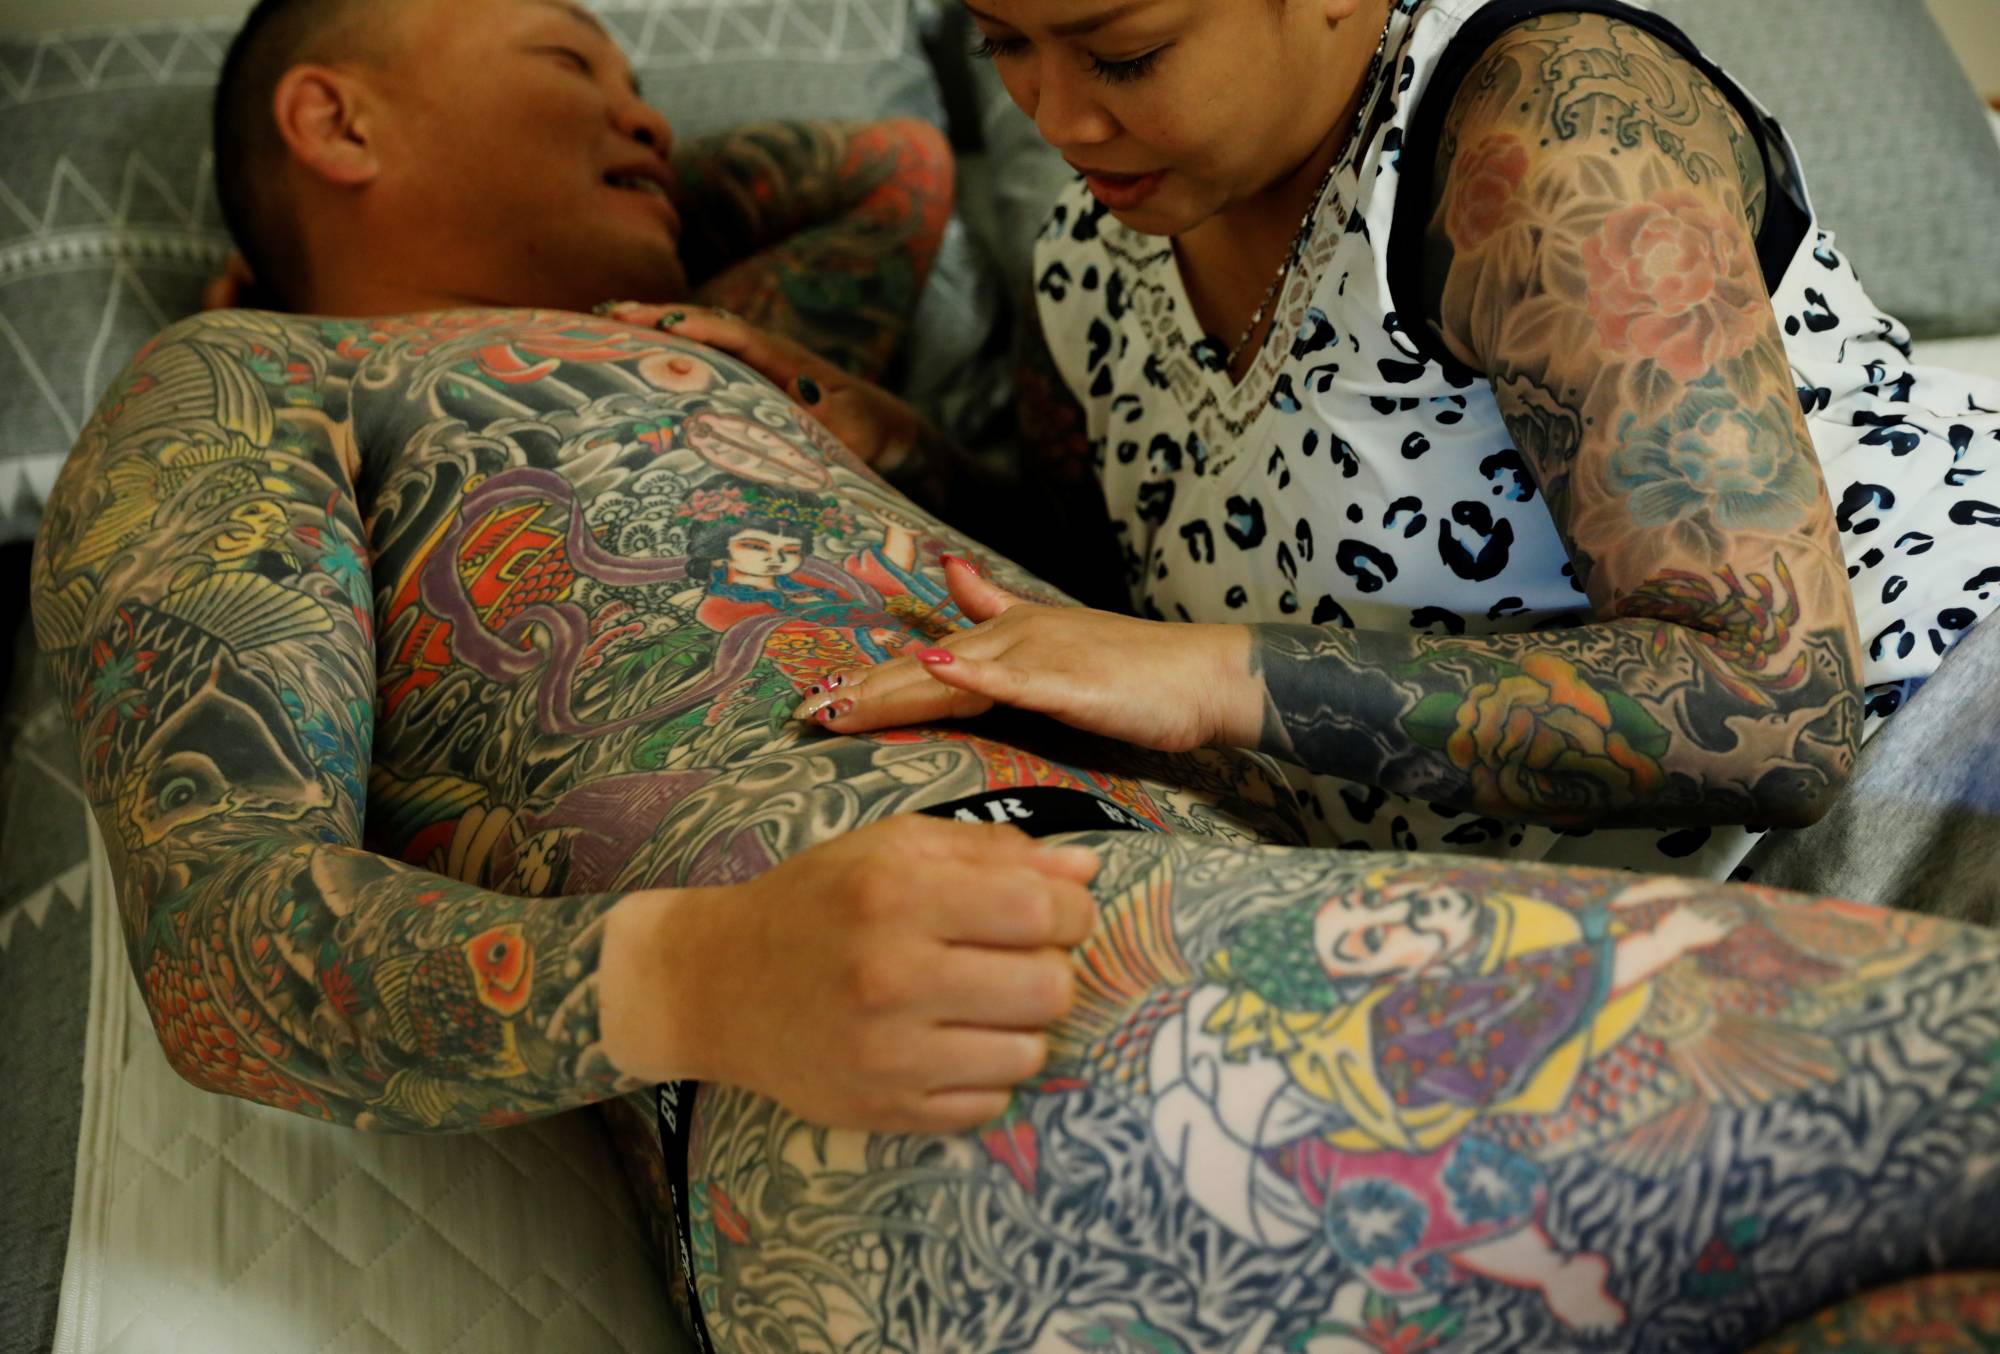 Bookkeeper Mina Yoshimura, 40, who works at her husband Hiroshi Yoshimura's company, touches a new tattoo that he got the same day, at their home in Tokyo on Oct. 2. | REUTERS